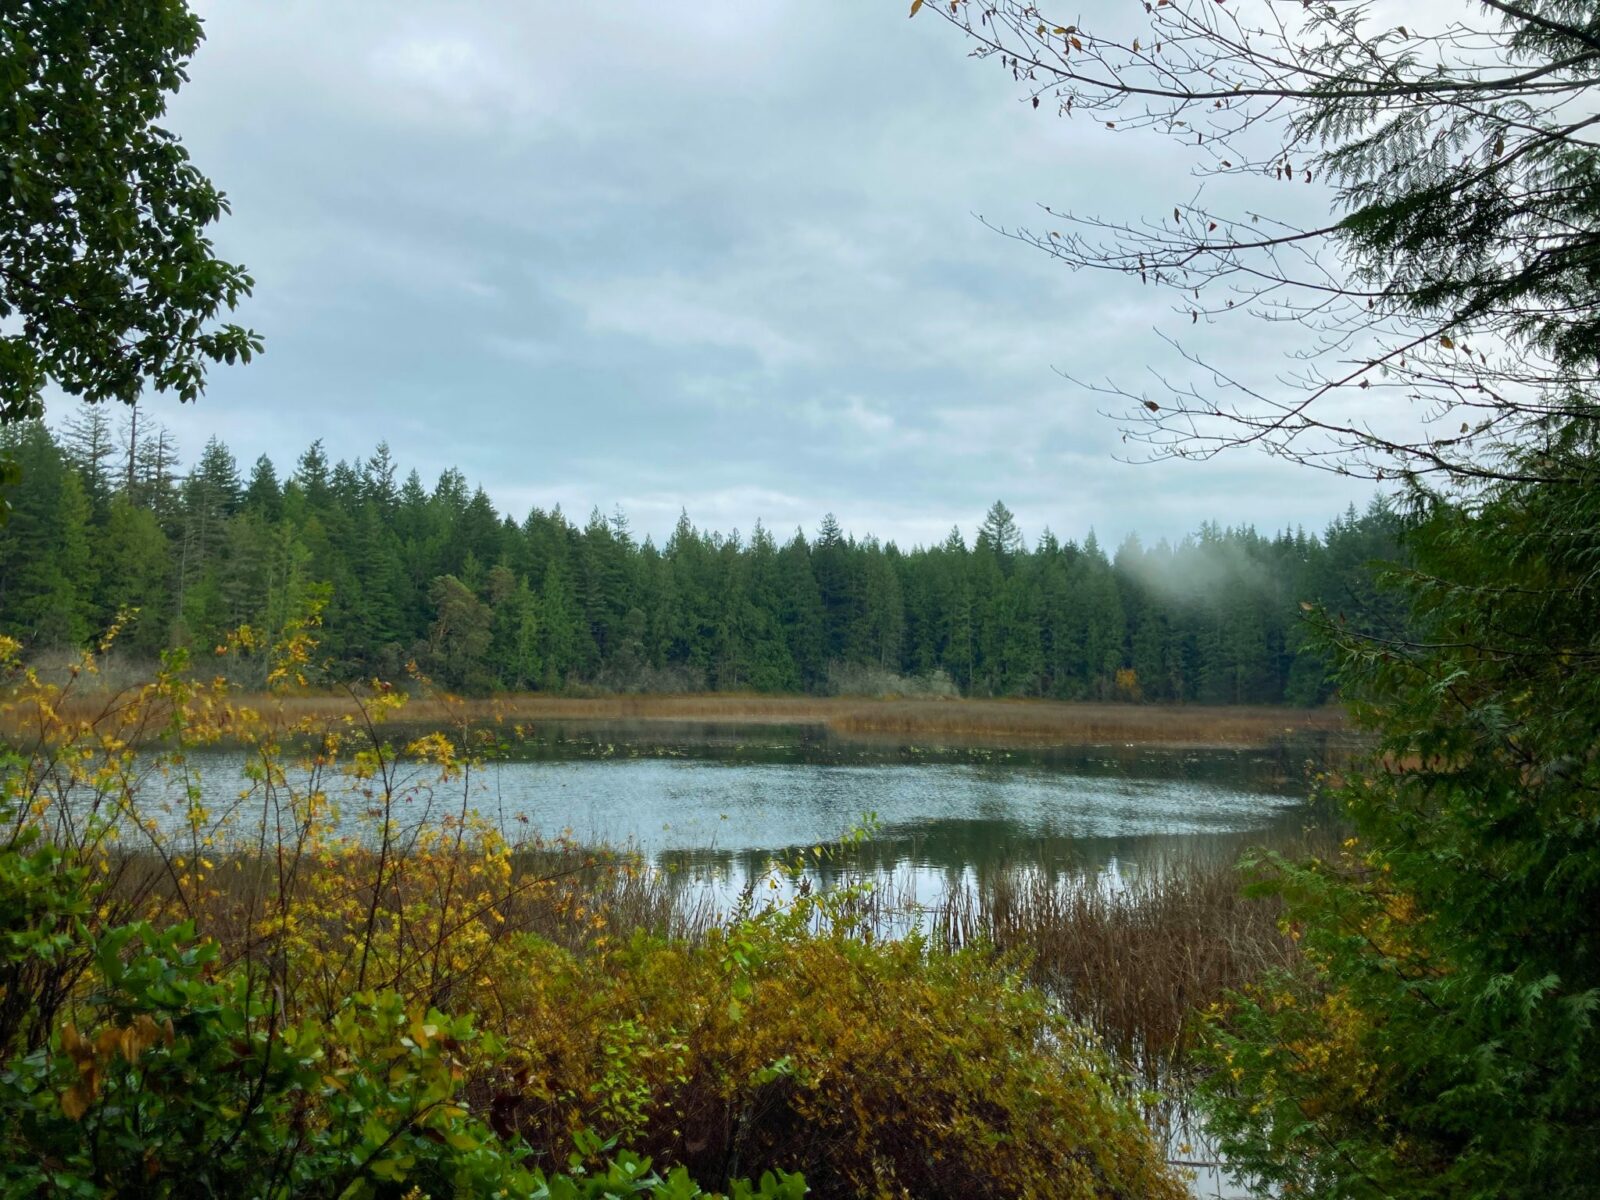 A shallow lake surrounded by reeds, shrubs and evergreen trees on a cloudy winter day in Gazzam Lake Nature Preserve, a hike on bainbridge island